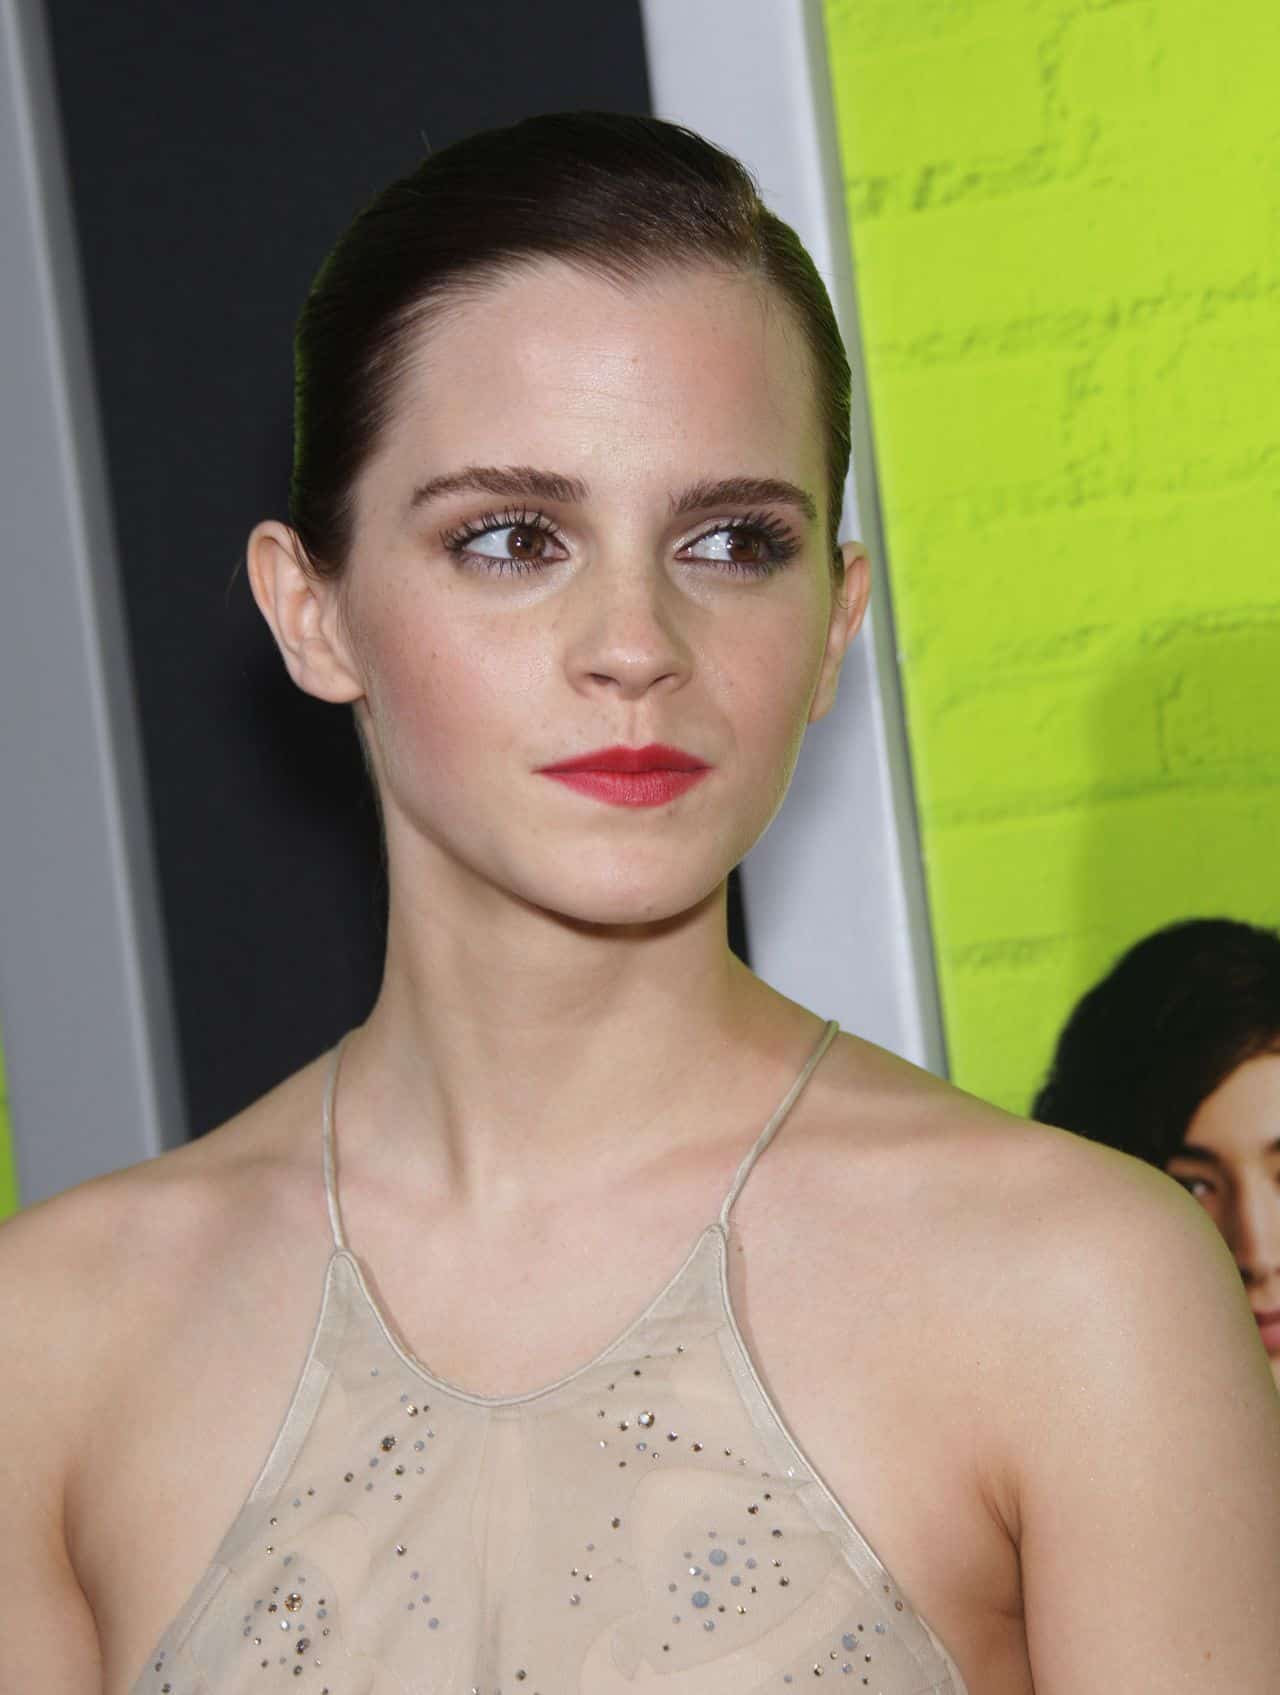 Emma Watson Sparkle at the Premiere of The Perks of Being a Wallflower